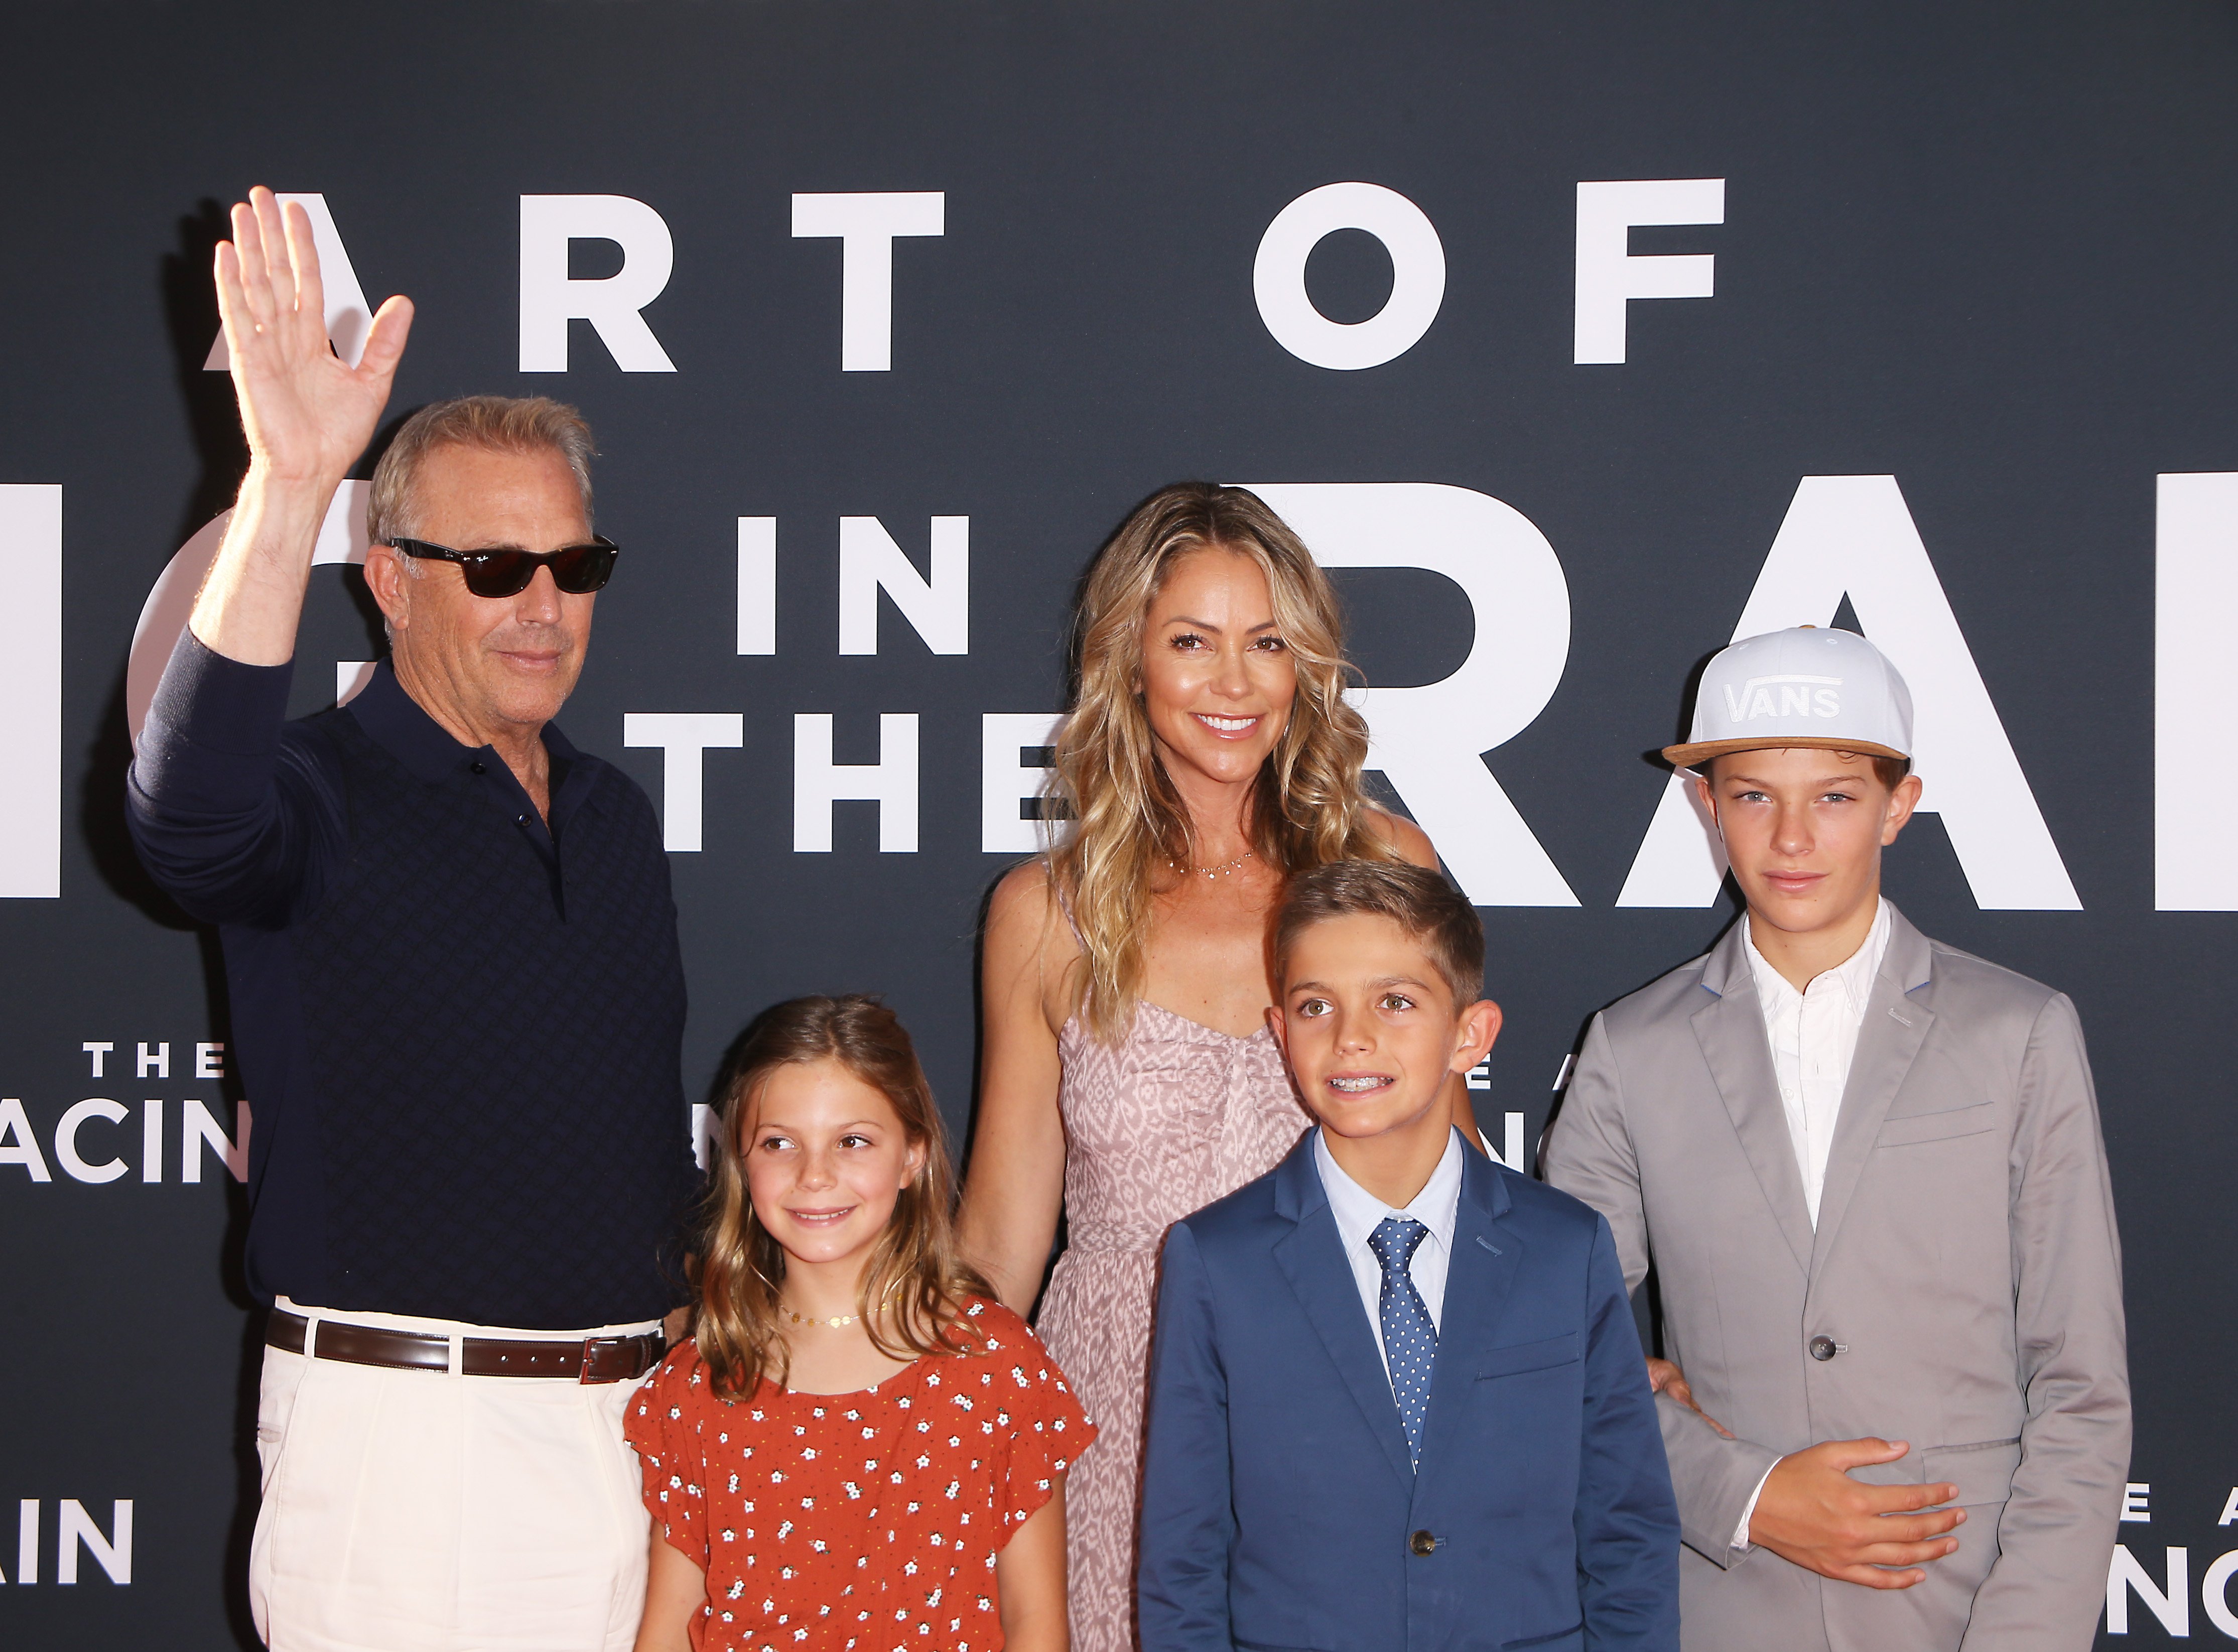 Kevin Costner, Christine Baumgartner and their children attend the Los Angeles premiere of 20th Century Fox's "The Art of Racing In The Rain" held at El Capitan Theatre on August 01, 2019 in Los Angeles, California. | Source: Getty Images